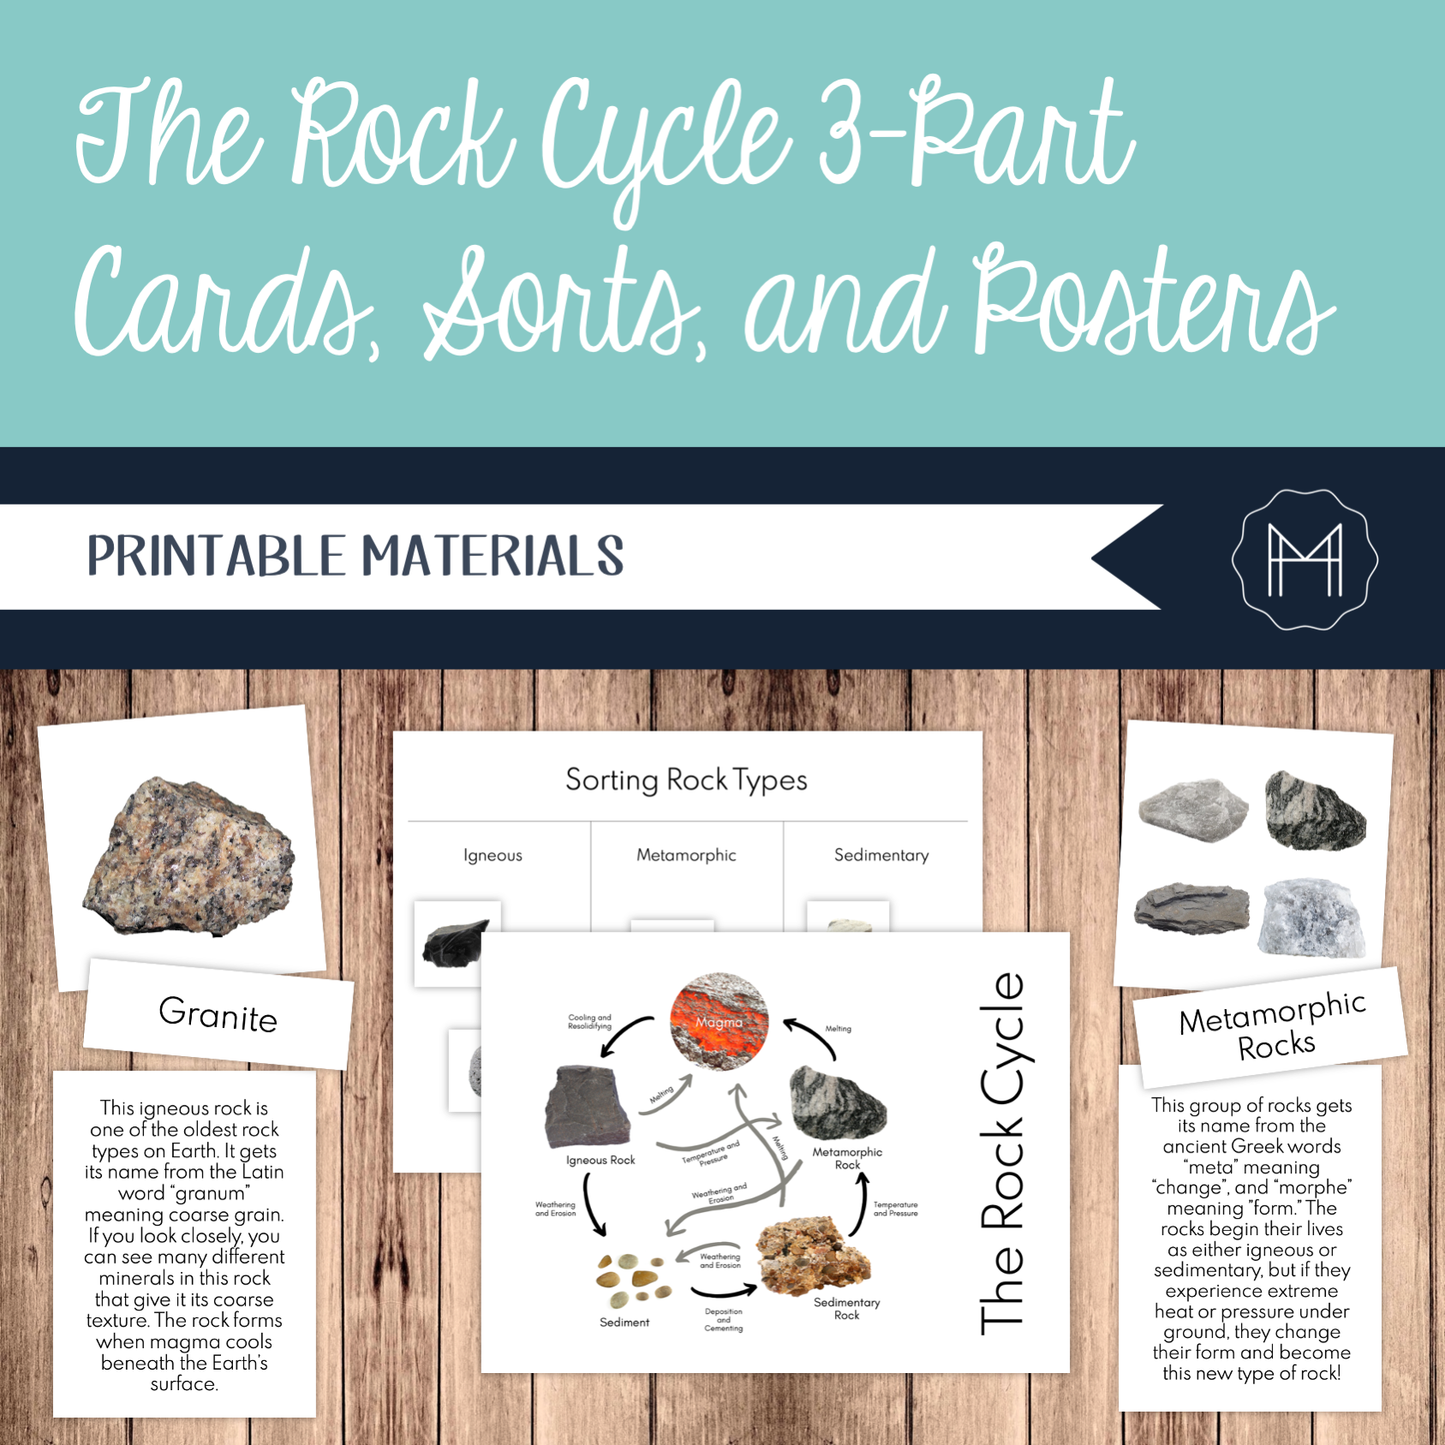 The Rock Cycle 3-Part Cards